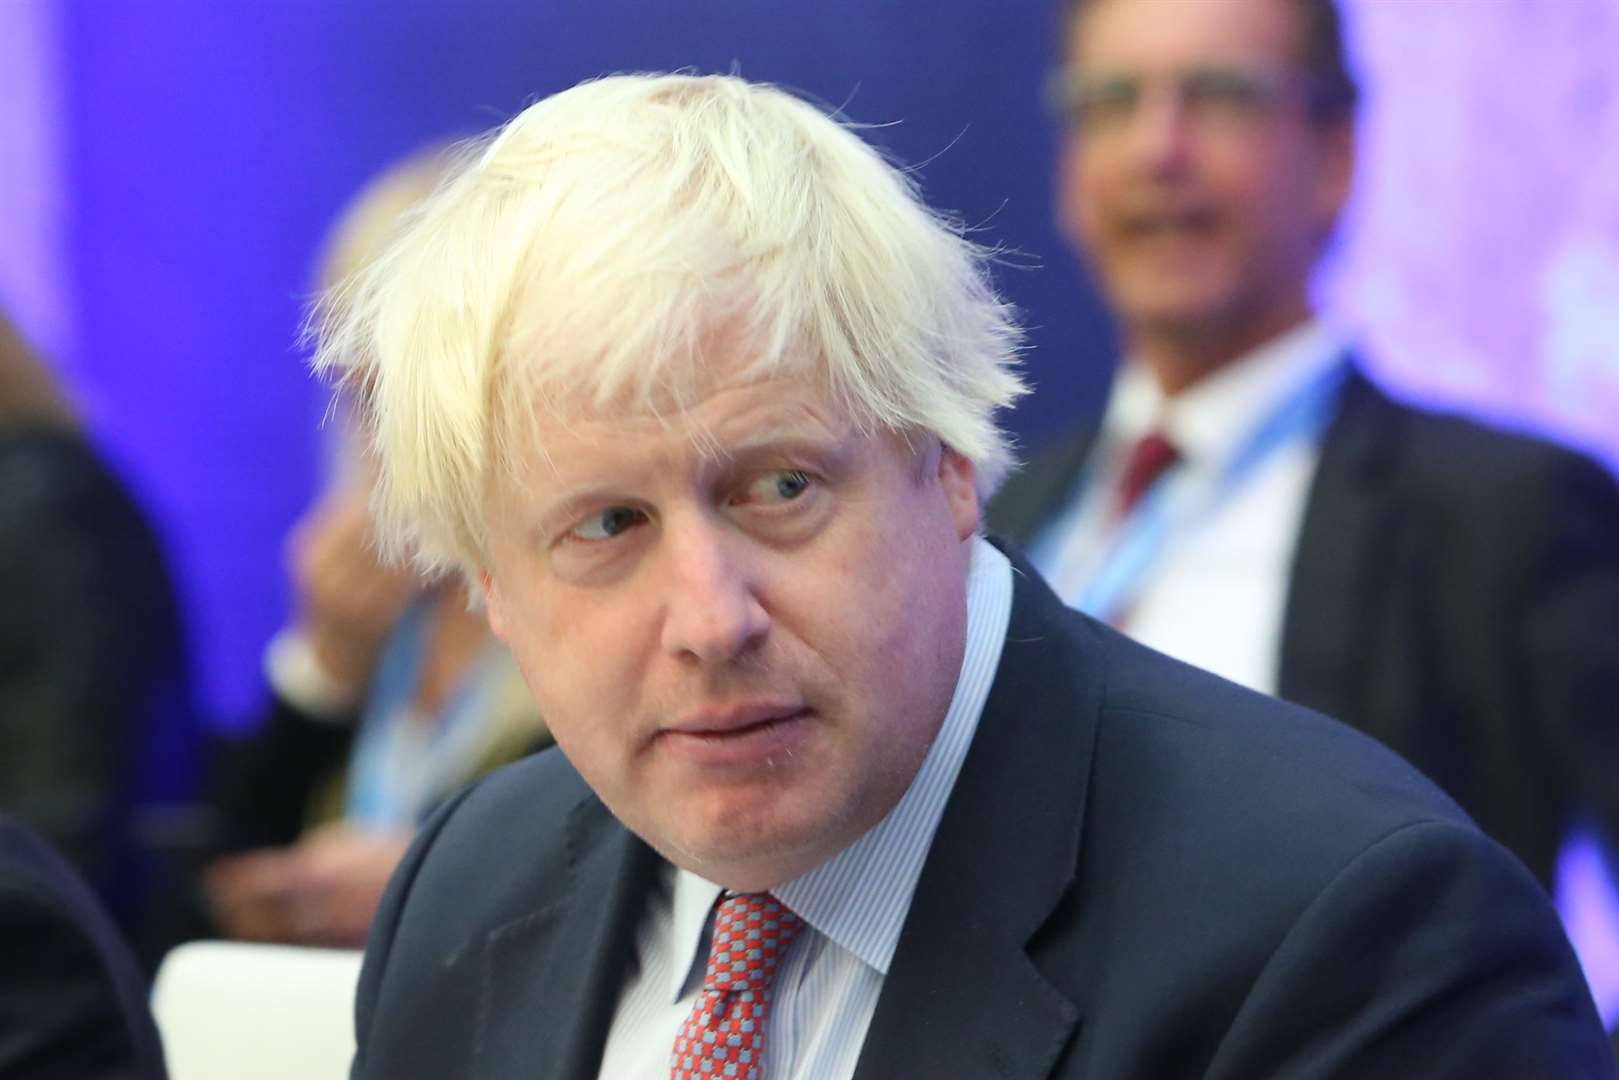 Boris Johnson has faced criticism for his plans to fund social care reforms this week